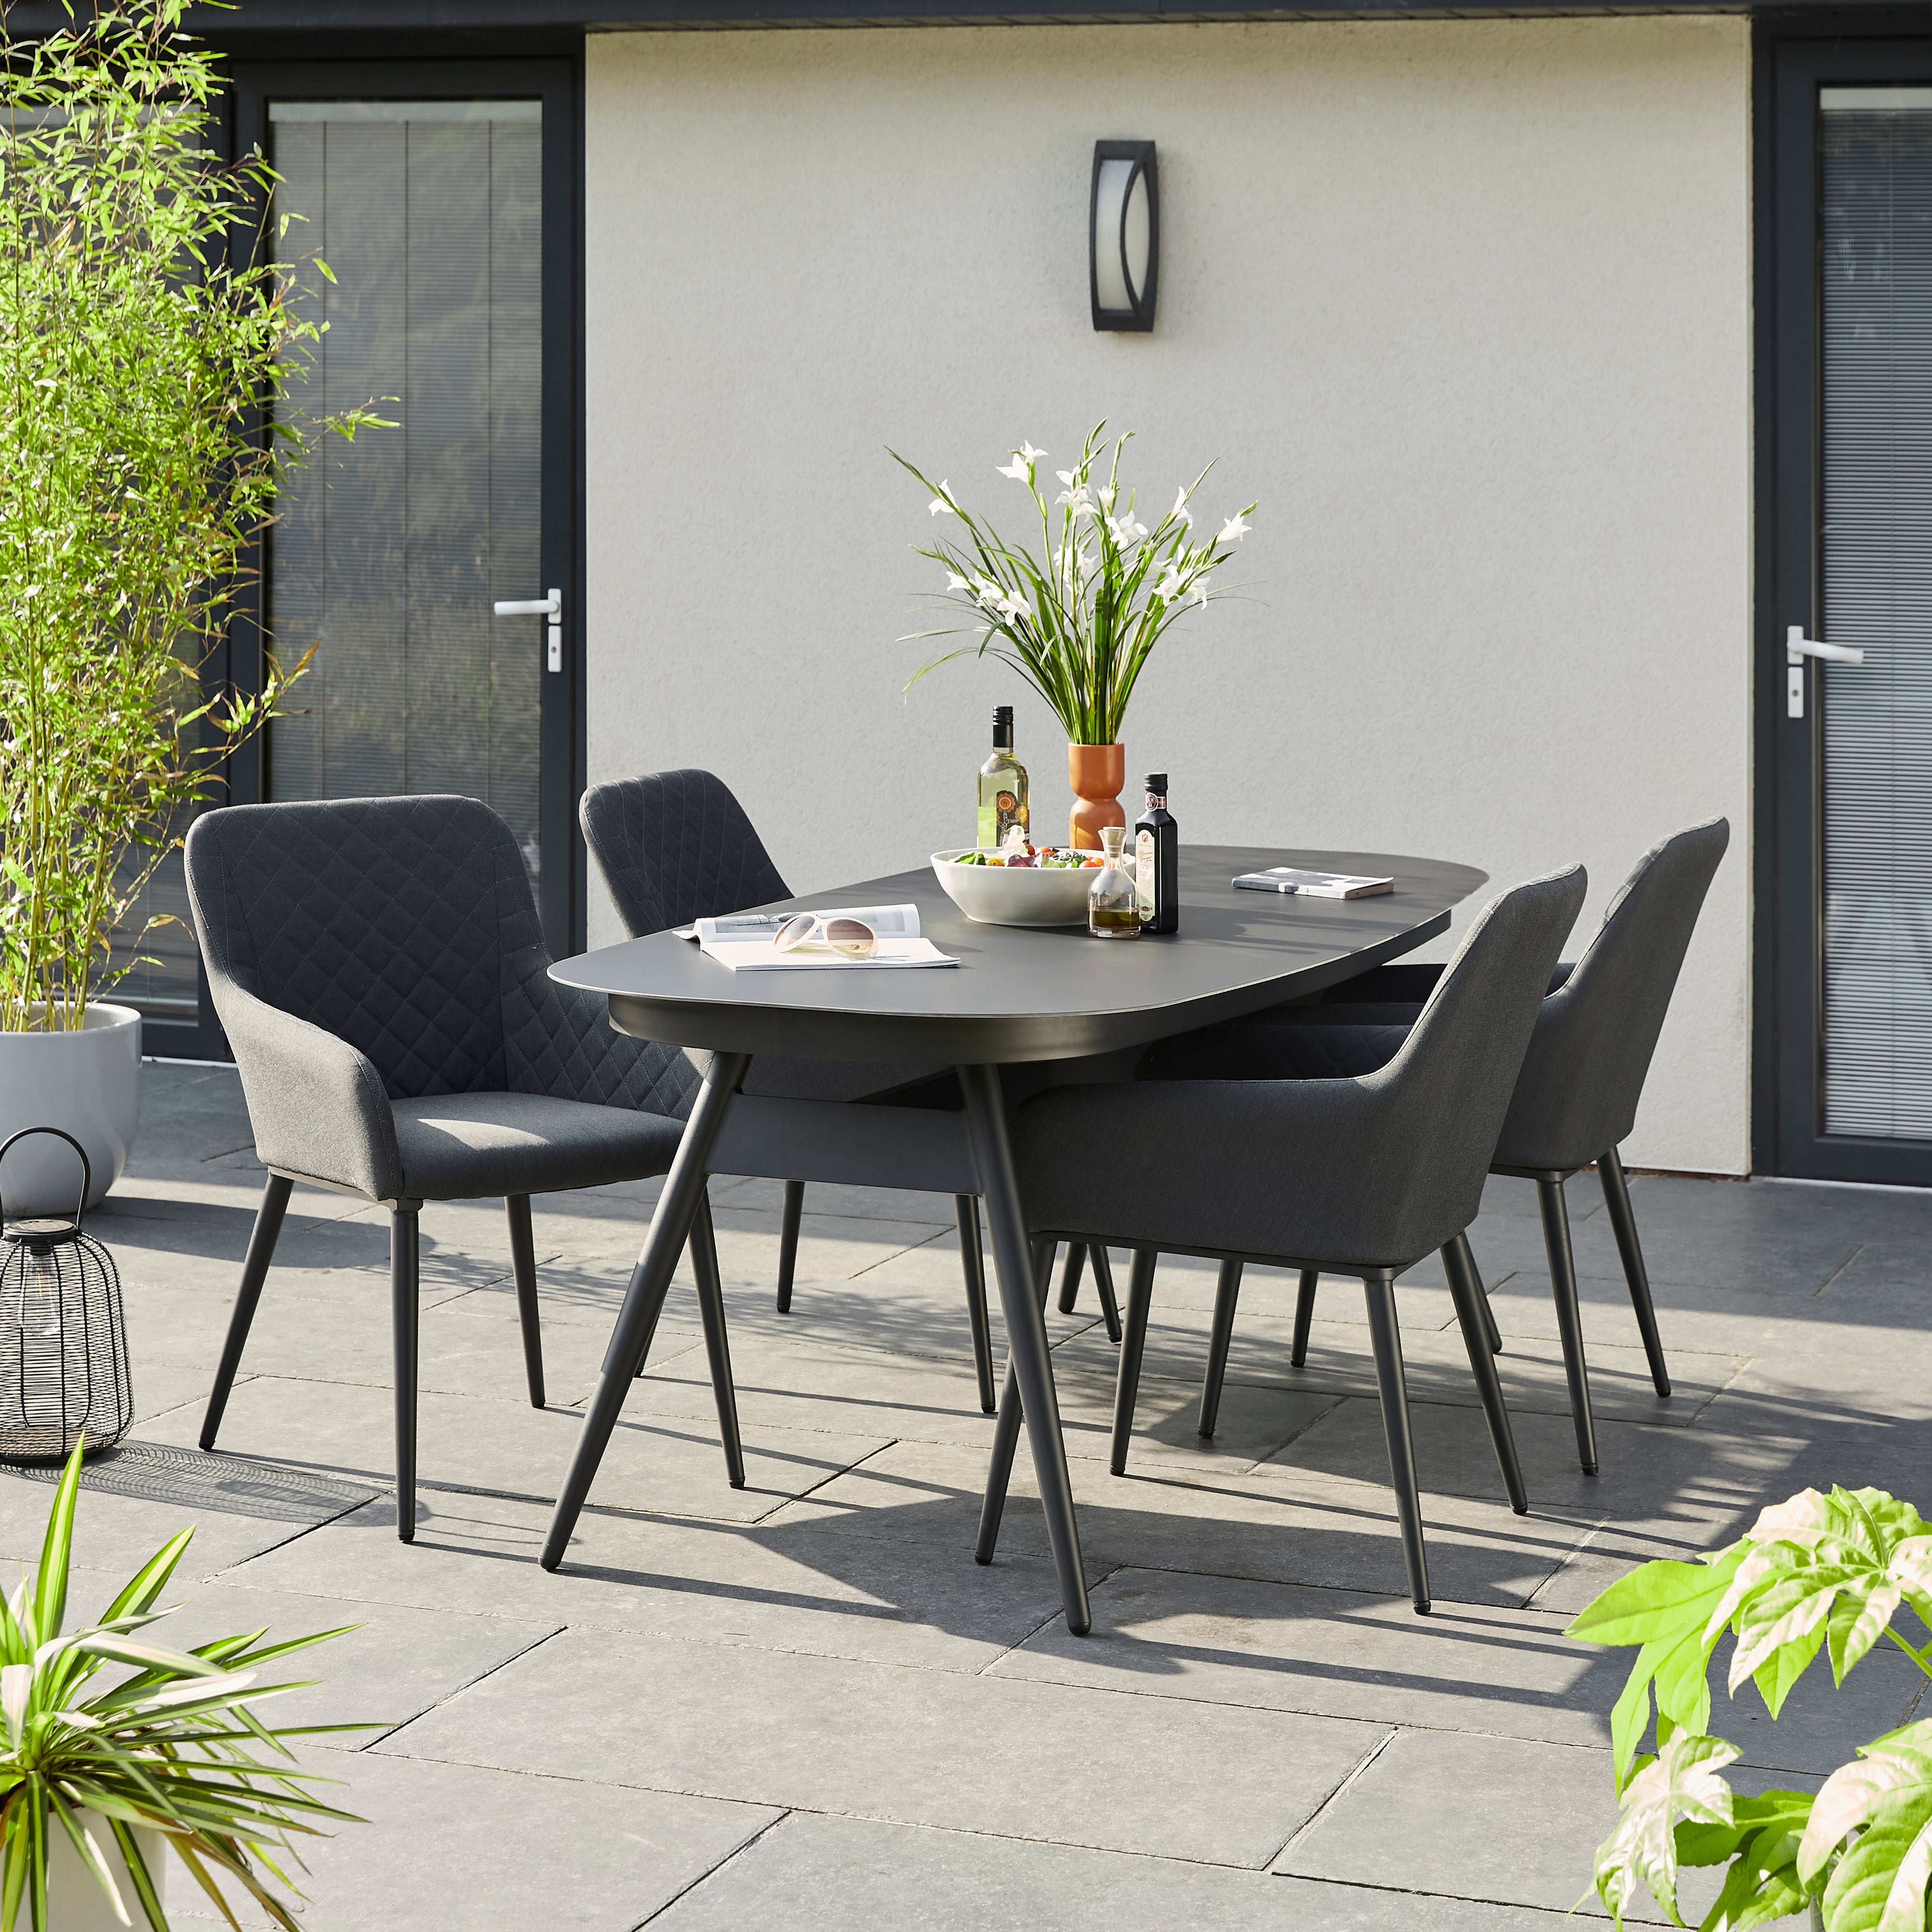 Outdoor Fabric Dining Set Charcoal Grey